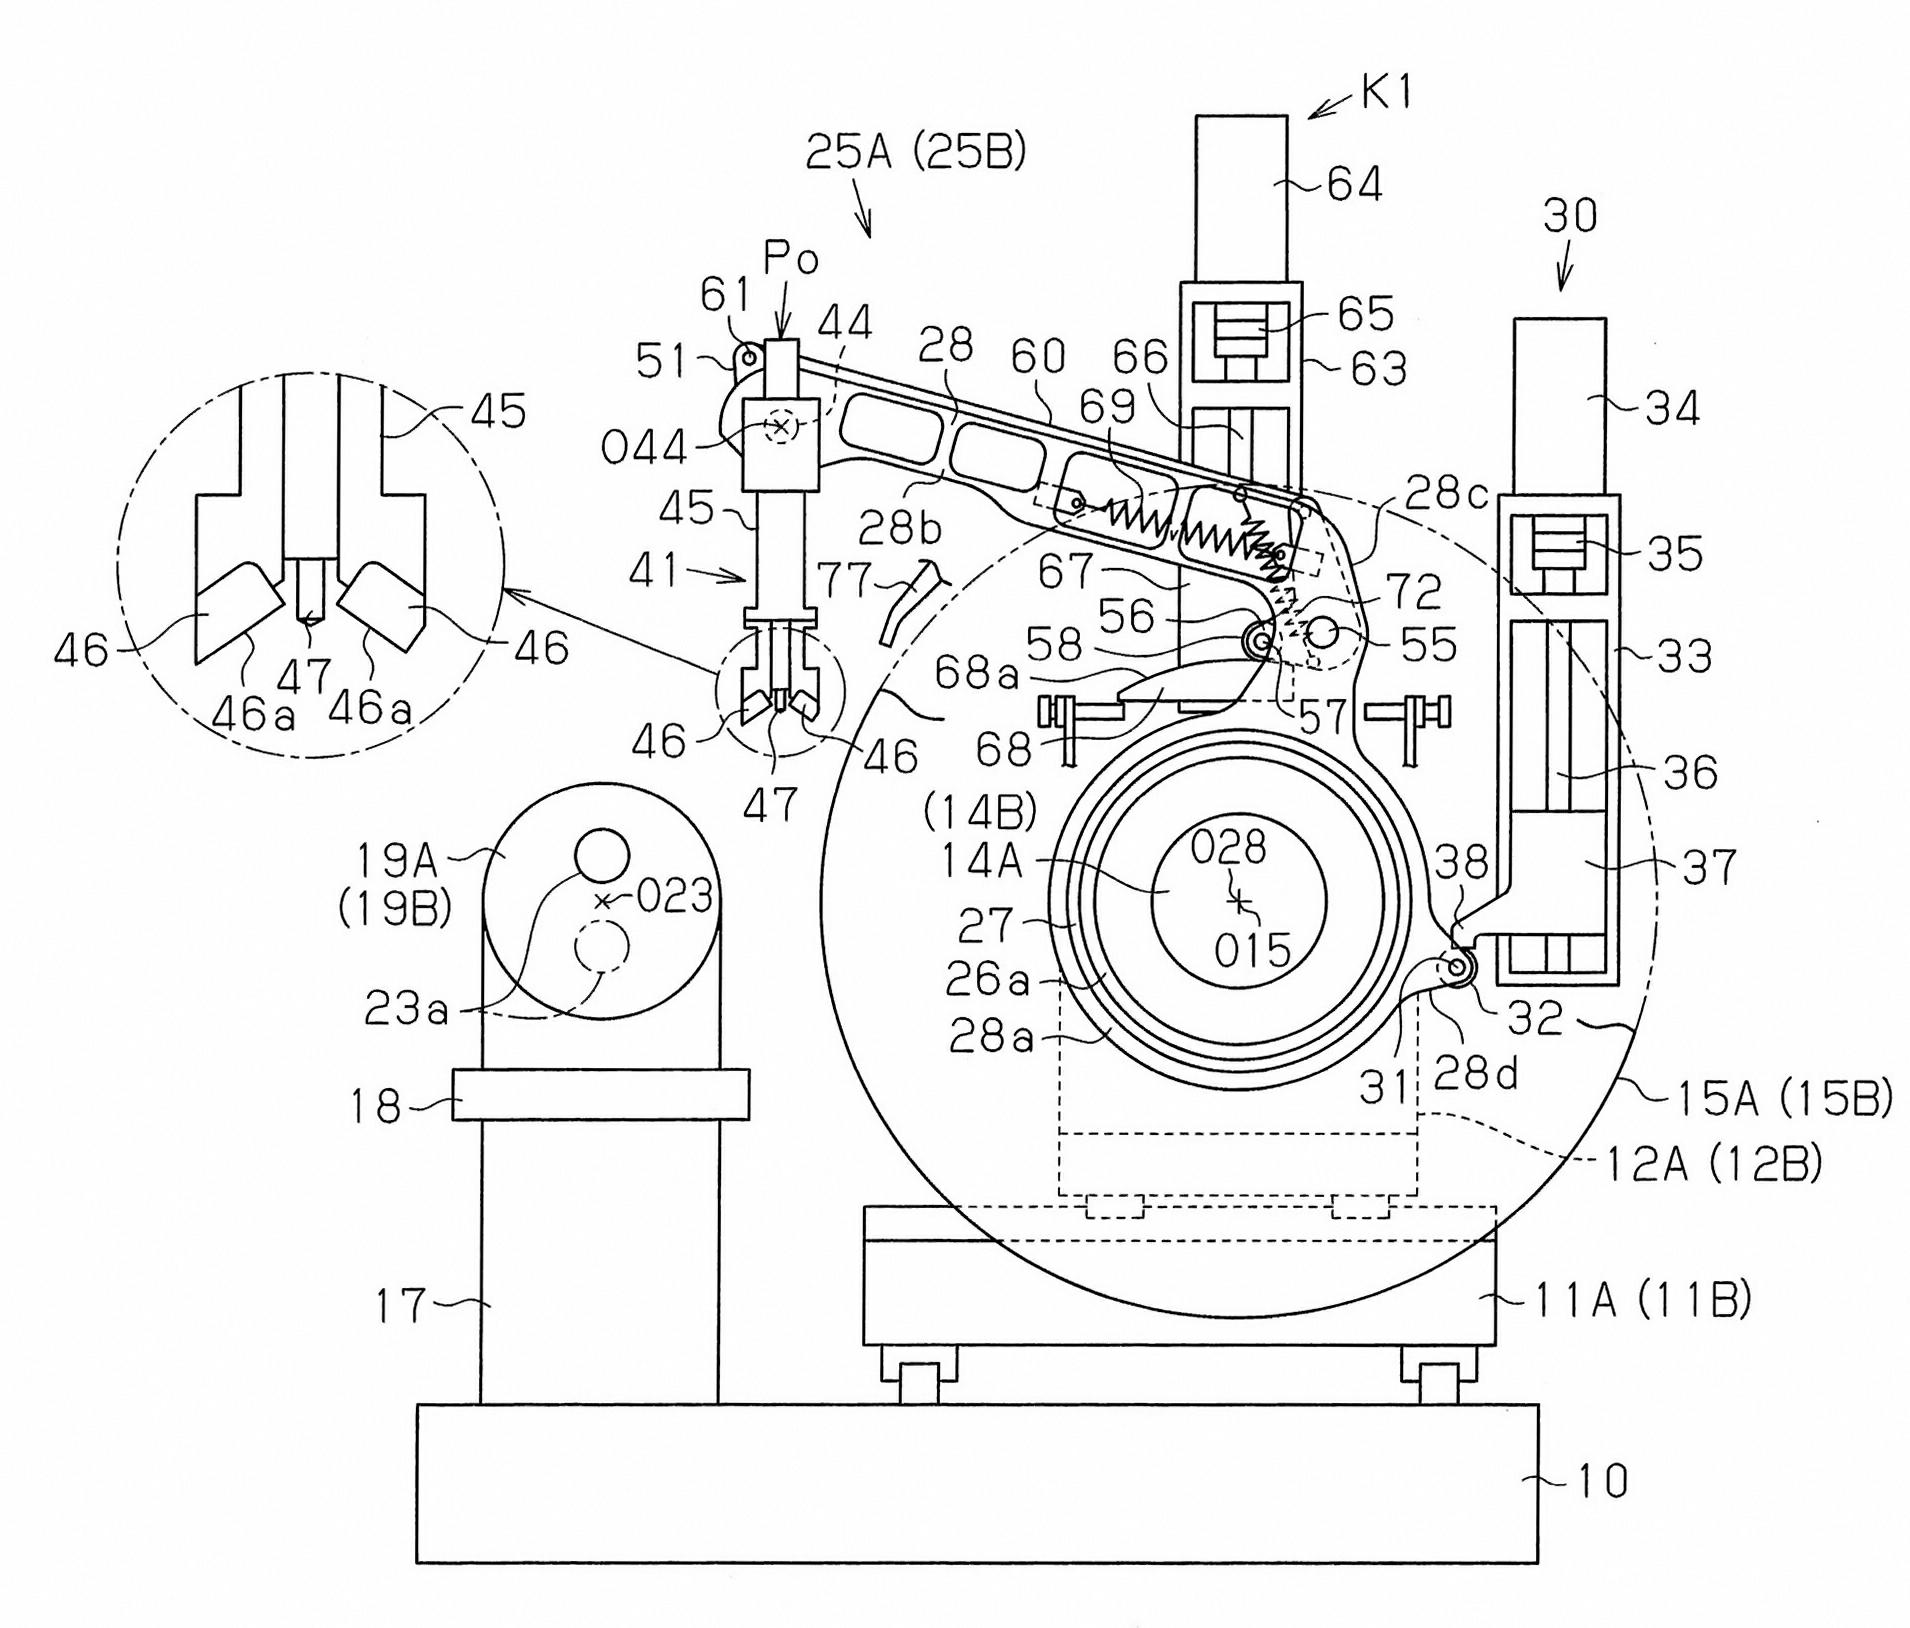 Grinding machine and measurement device